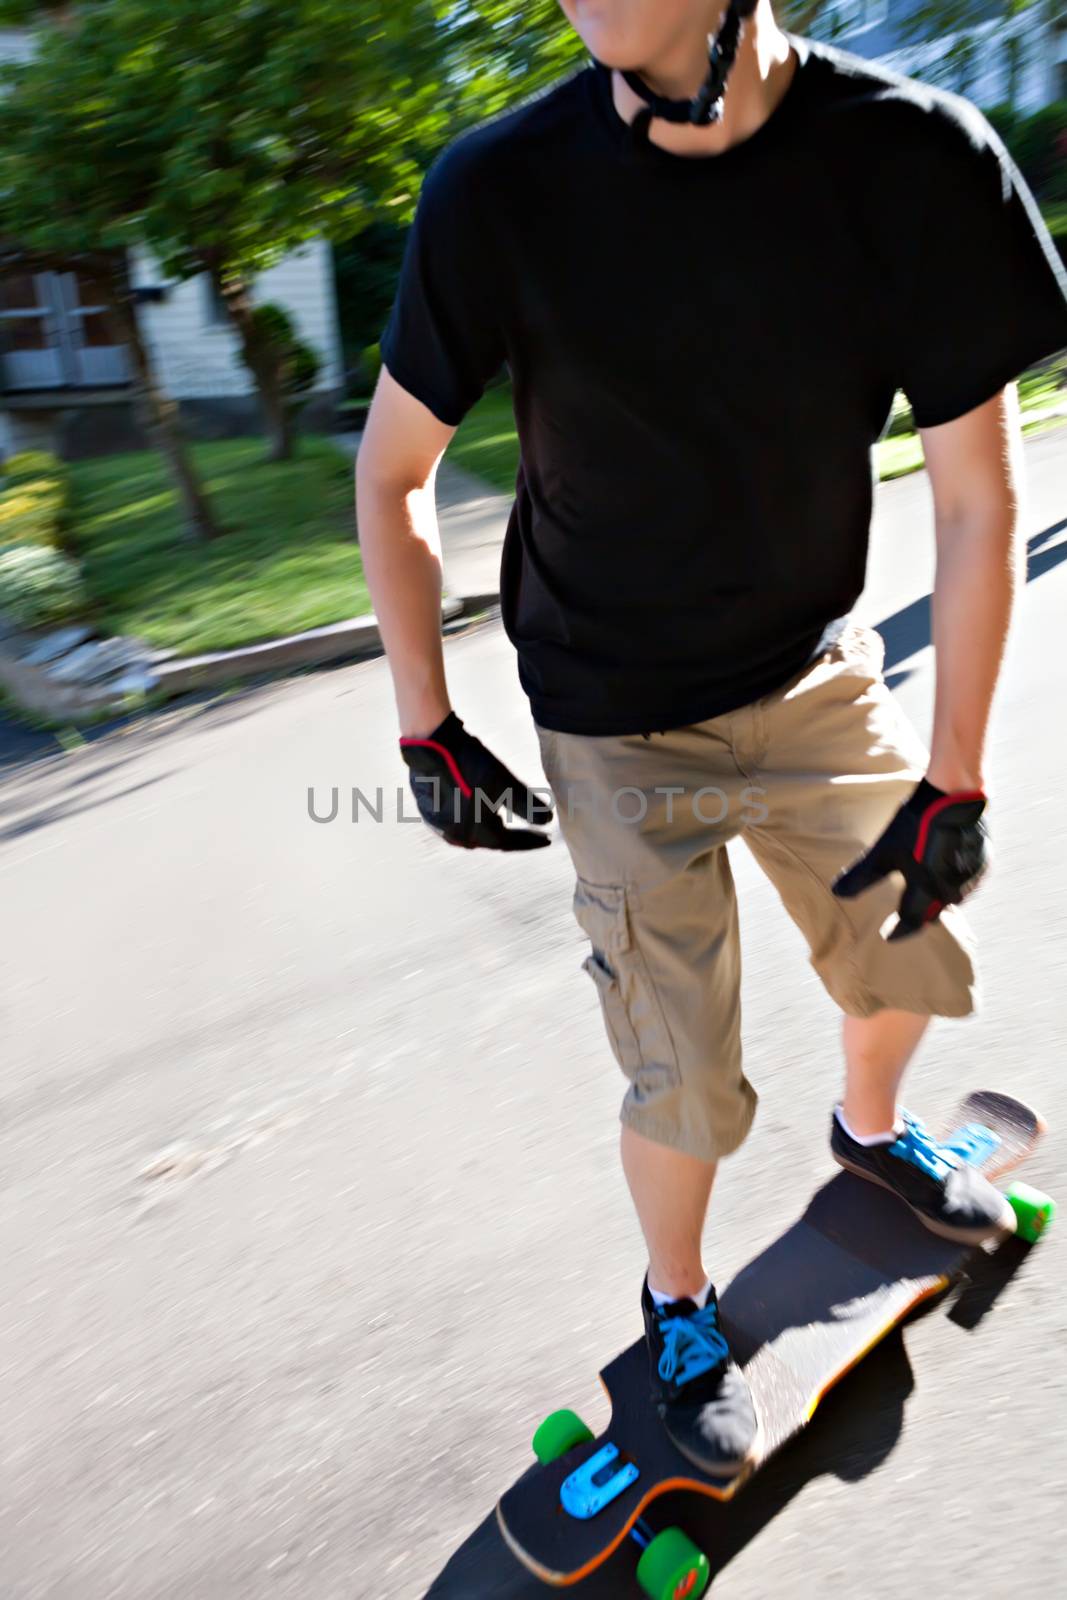 Action shot of a longboarder skating on an urban road. Slight motion blur.